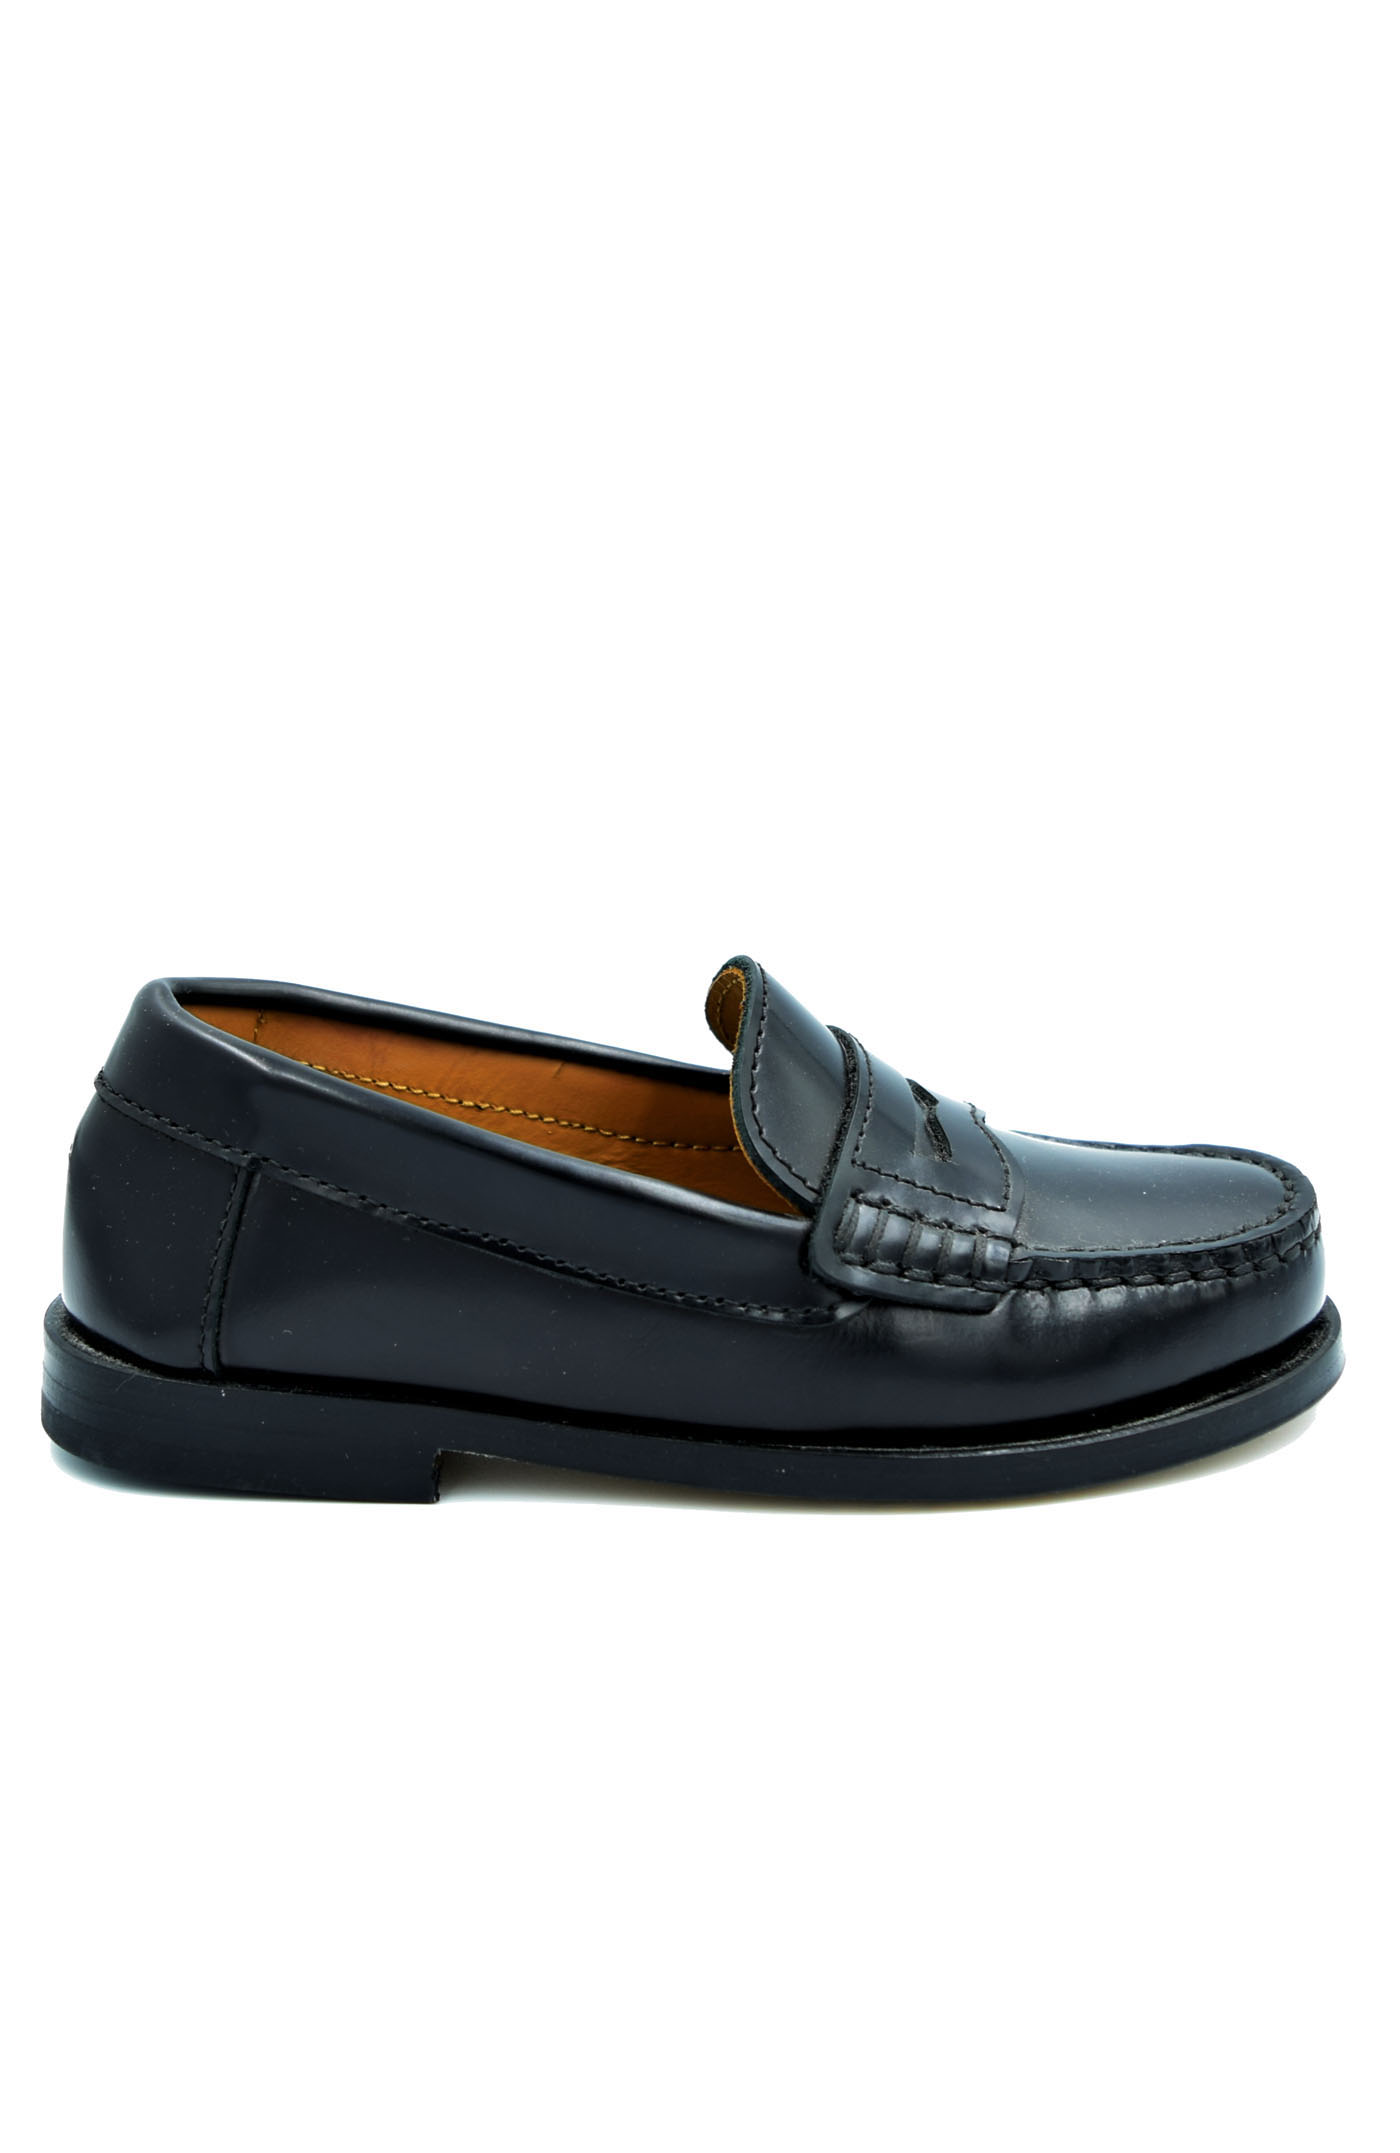 Goodyear welted penny loafers in black polished calf VENDOR